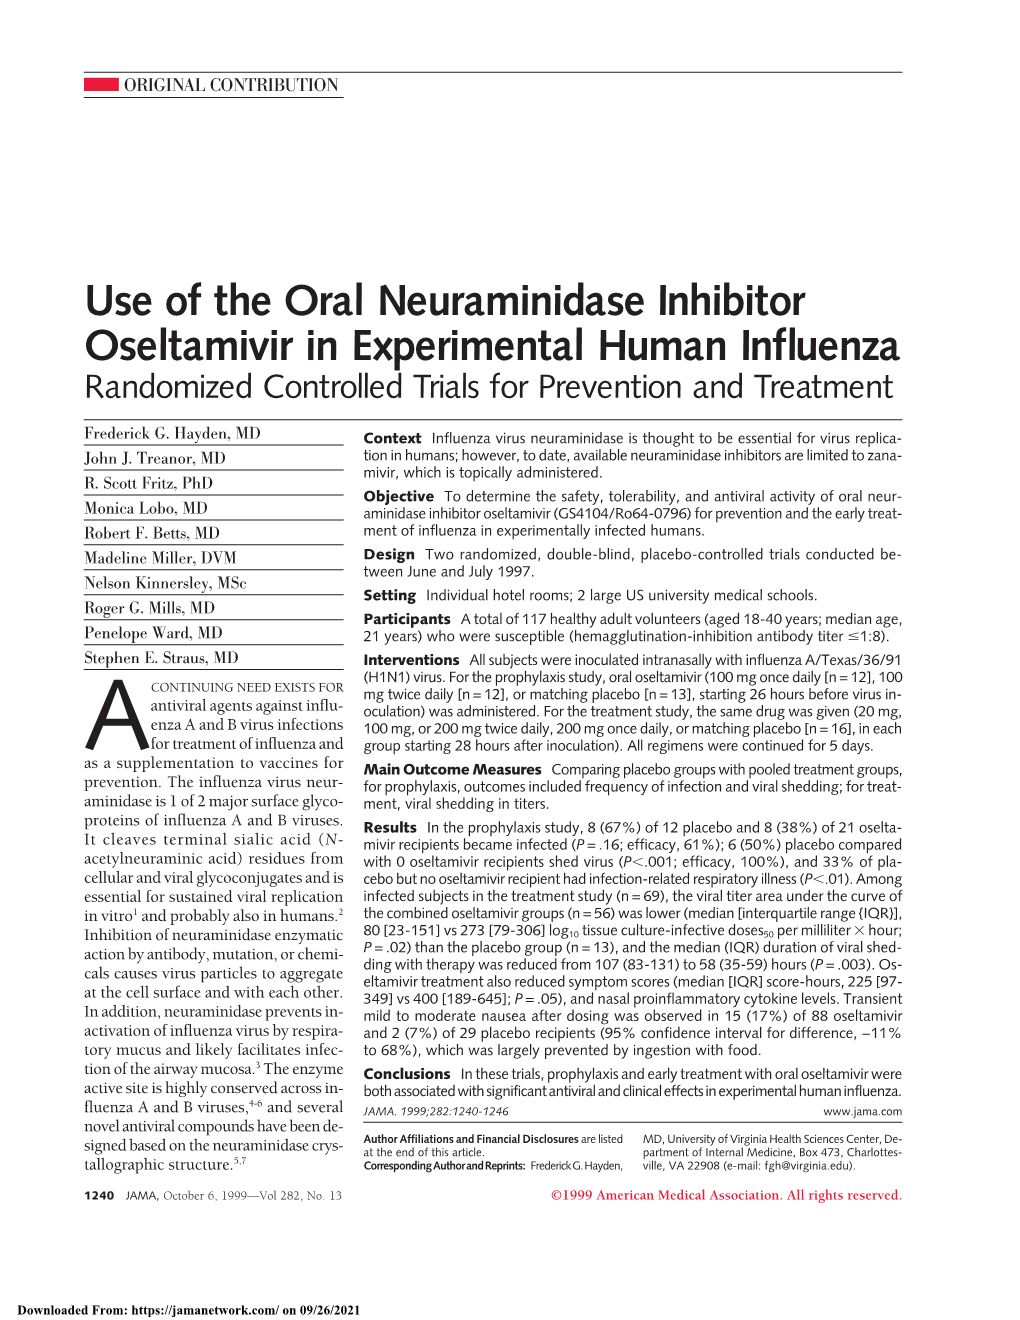 Use of the Oral Neuraminidase Inhibitor Oseltamivir in Experimental Human Influenza Randomized Controlled Trials for Prevention and Treatment